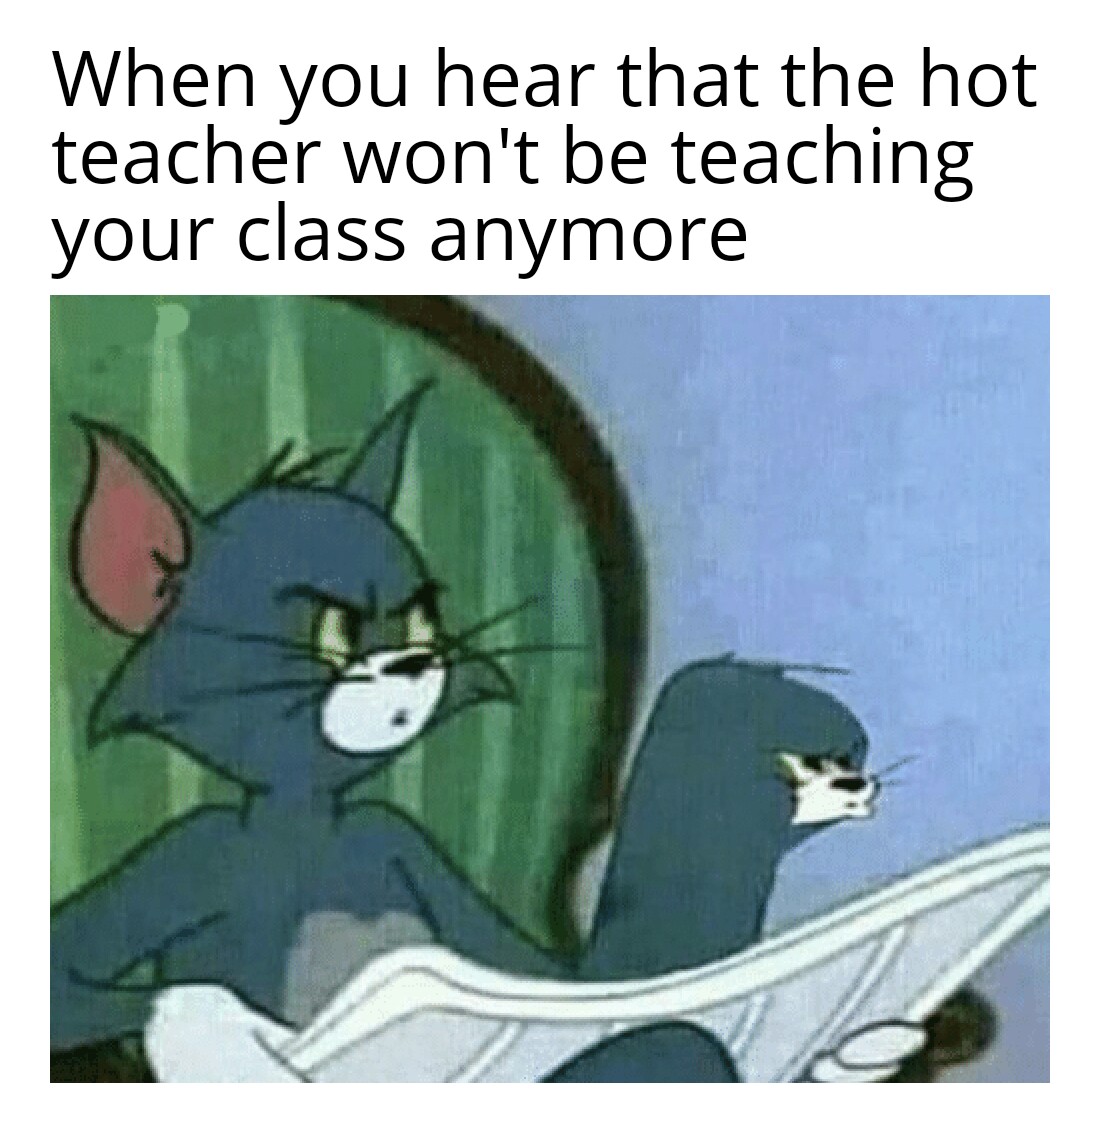 youre watching porn on your phone - When you hear that the hot teacher won't be teaching your class anymore